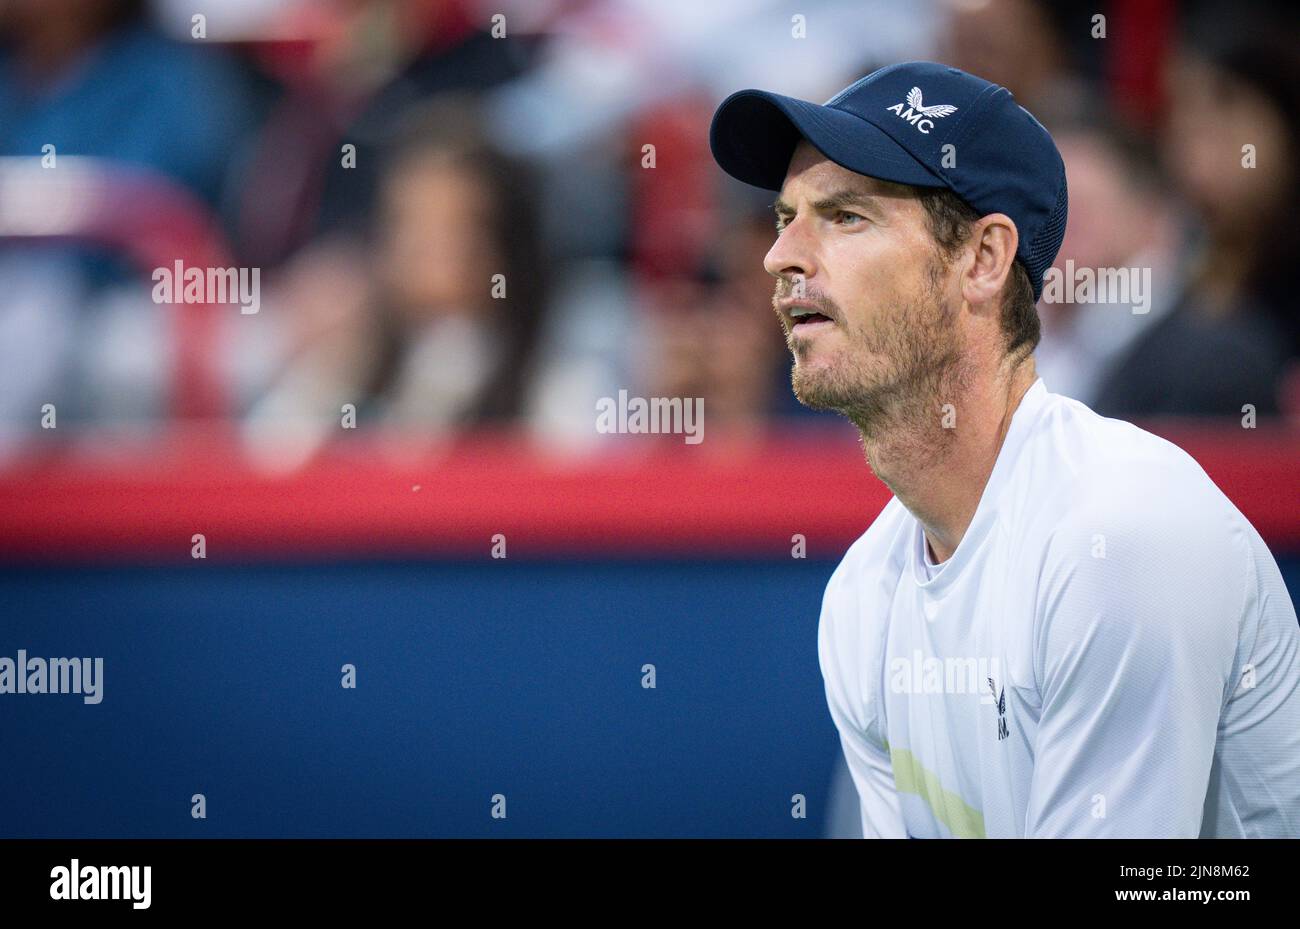 Andy Murray of England looks on during his match against Taylor Fritz of the U.S. at the National Bank Open at Stade IGA on August 8, 2022 in Montreal, Canada. Montreal, Quebec, Canada August 8, 2022. Credit: Mathieu Belanger/AFLO/Alamy Live News Stock Photo